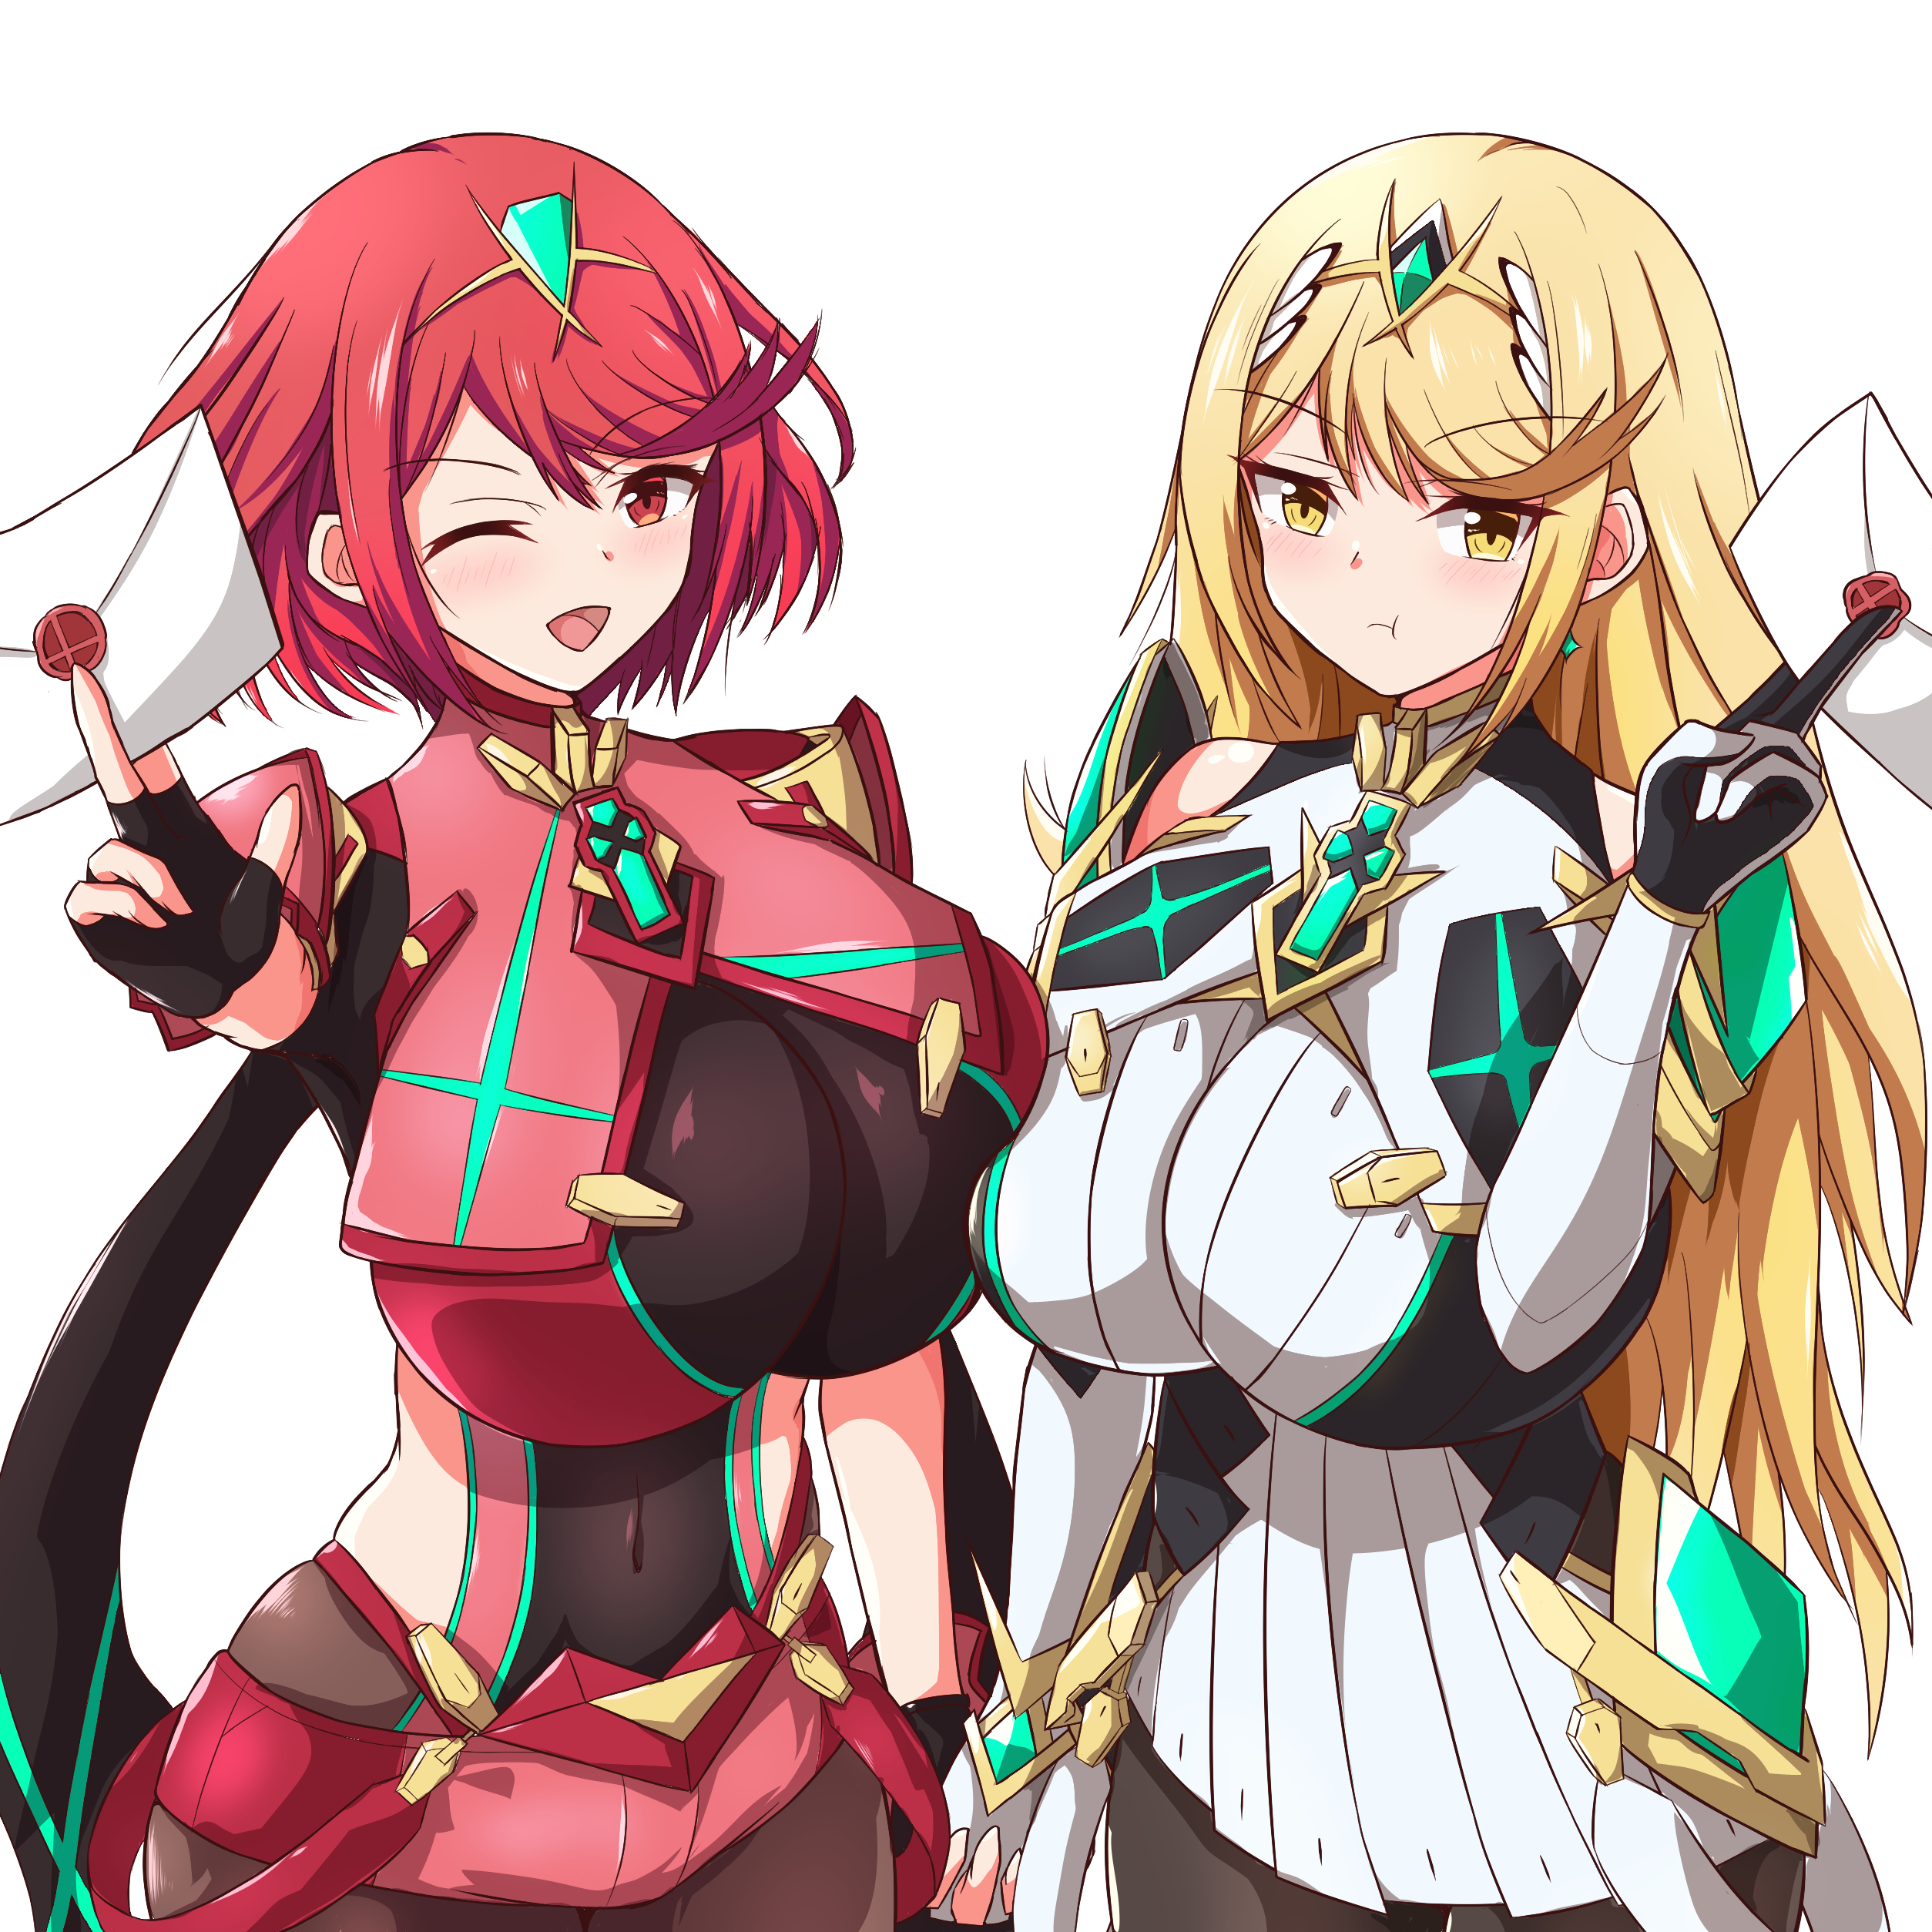 Anime 2508x2508 anime anime girls Xenoblade Chronicles Xenoblade Chronicles 2 Homura (Xenoblade 2) Hikari (Xenoblade Chronicles 2) redhead long hair blonde two women artwork digital art fan art boobs big boobs huge breasts bursting breasts curvy white background video games anime games video game girls shoulder length hair one eye closed red eyes letter yellow eyes looking at viewer